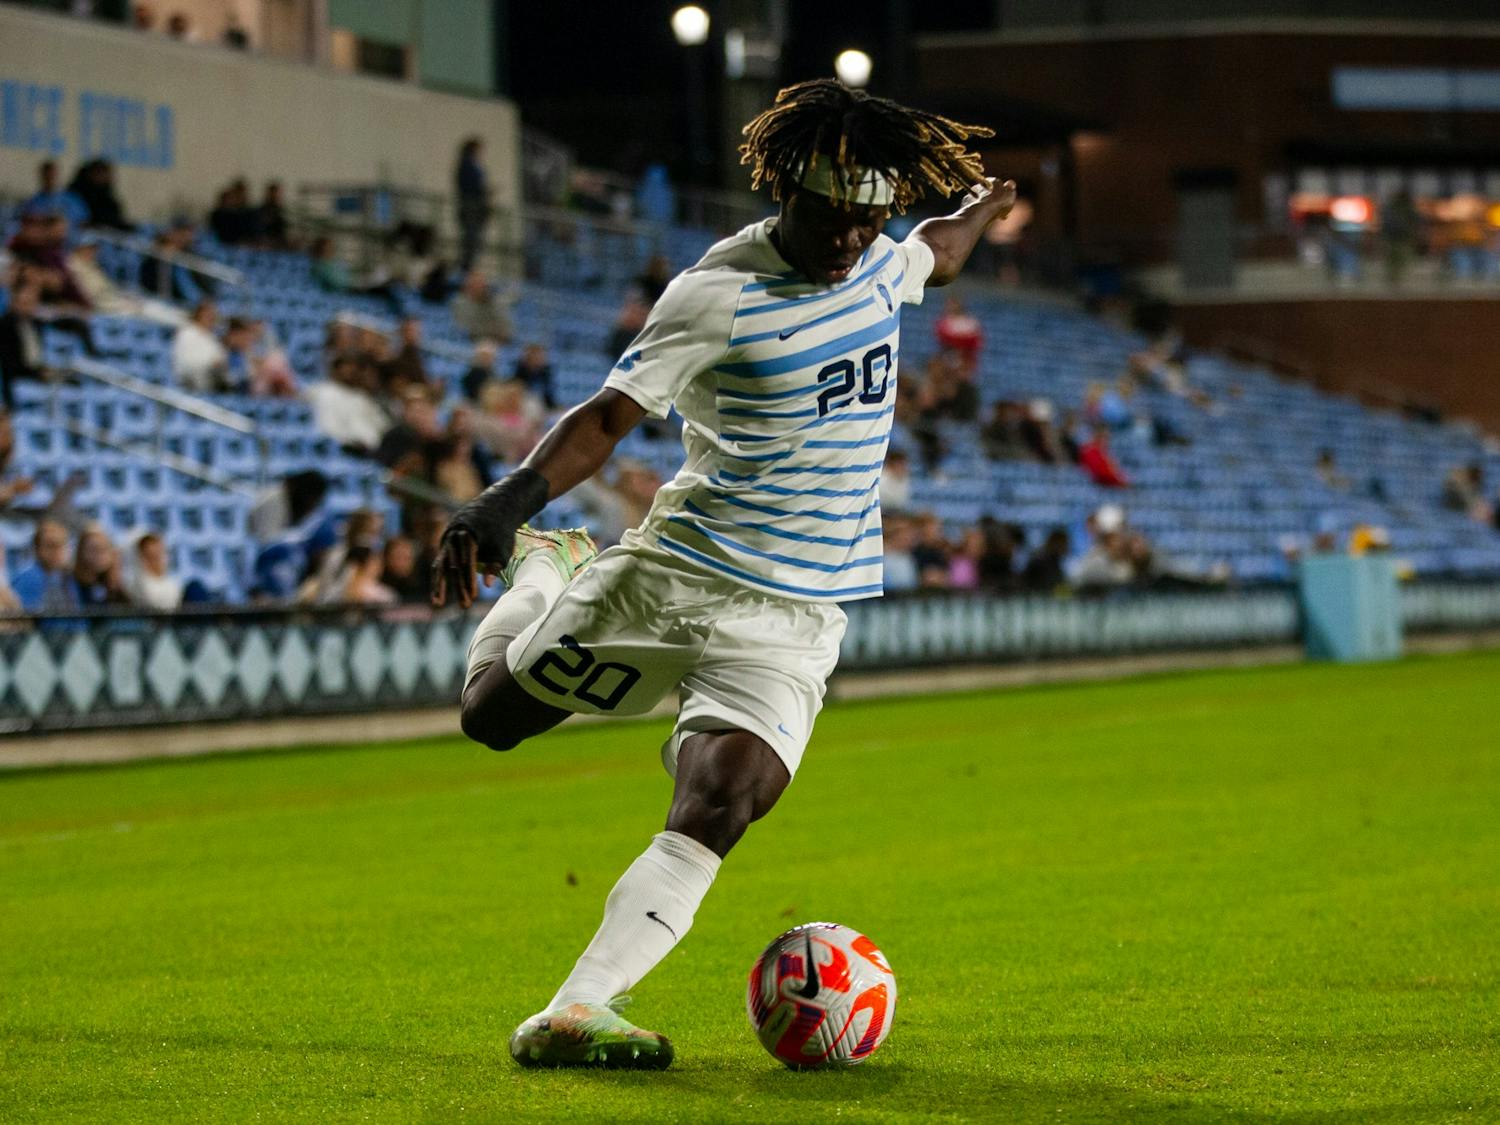 UNC junior forward Ernest Bawa (20) passes the ball during UNC's 1-0 victory against VCU on Tuesday, Oct. 11, 2022, at Dorrance Field.